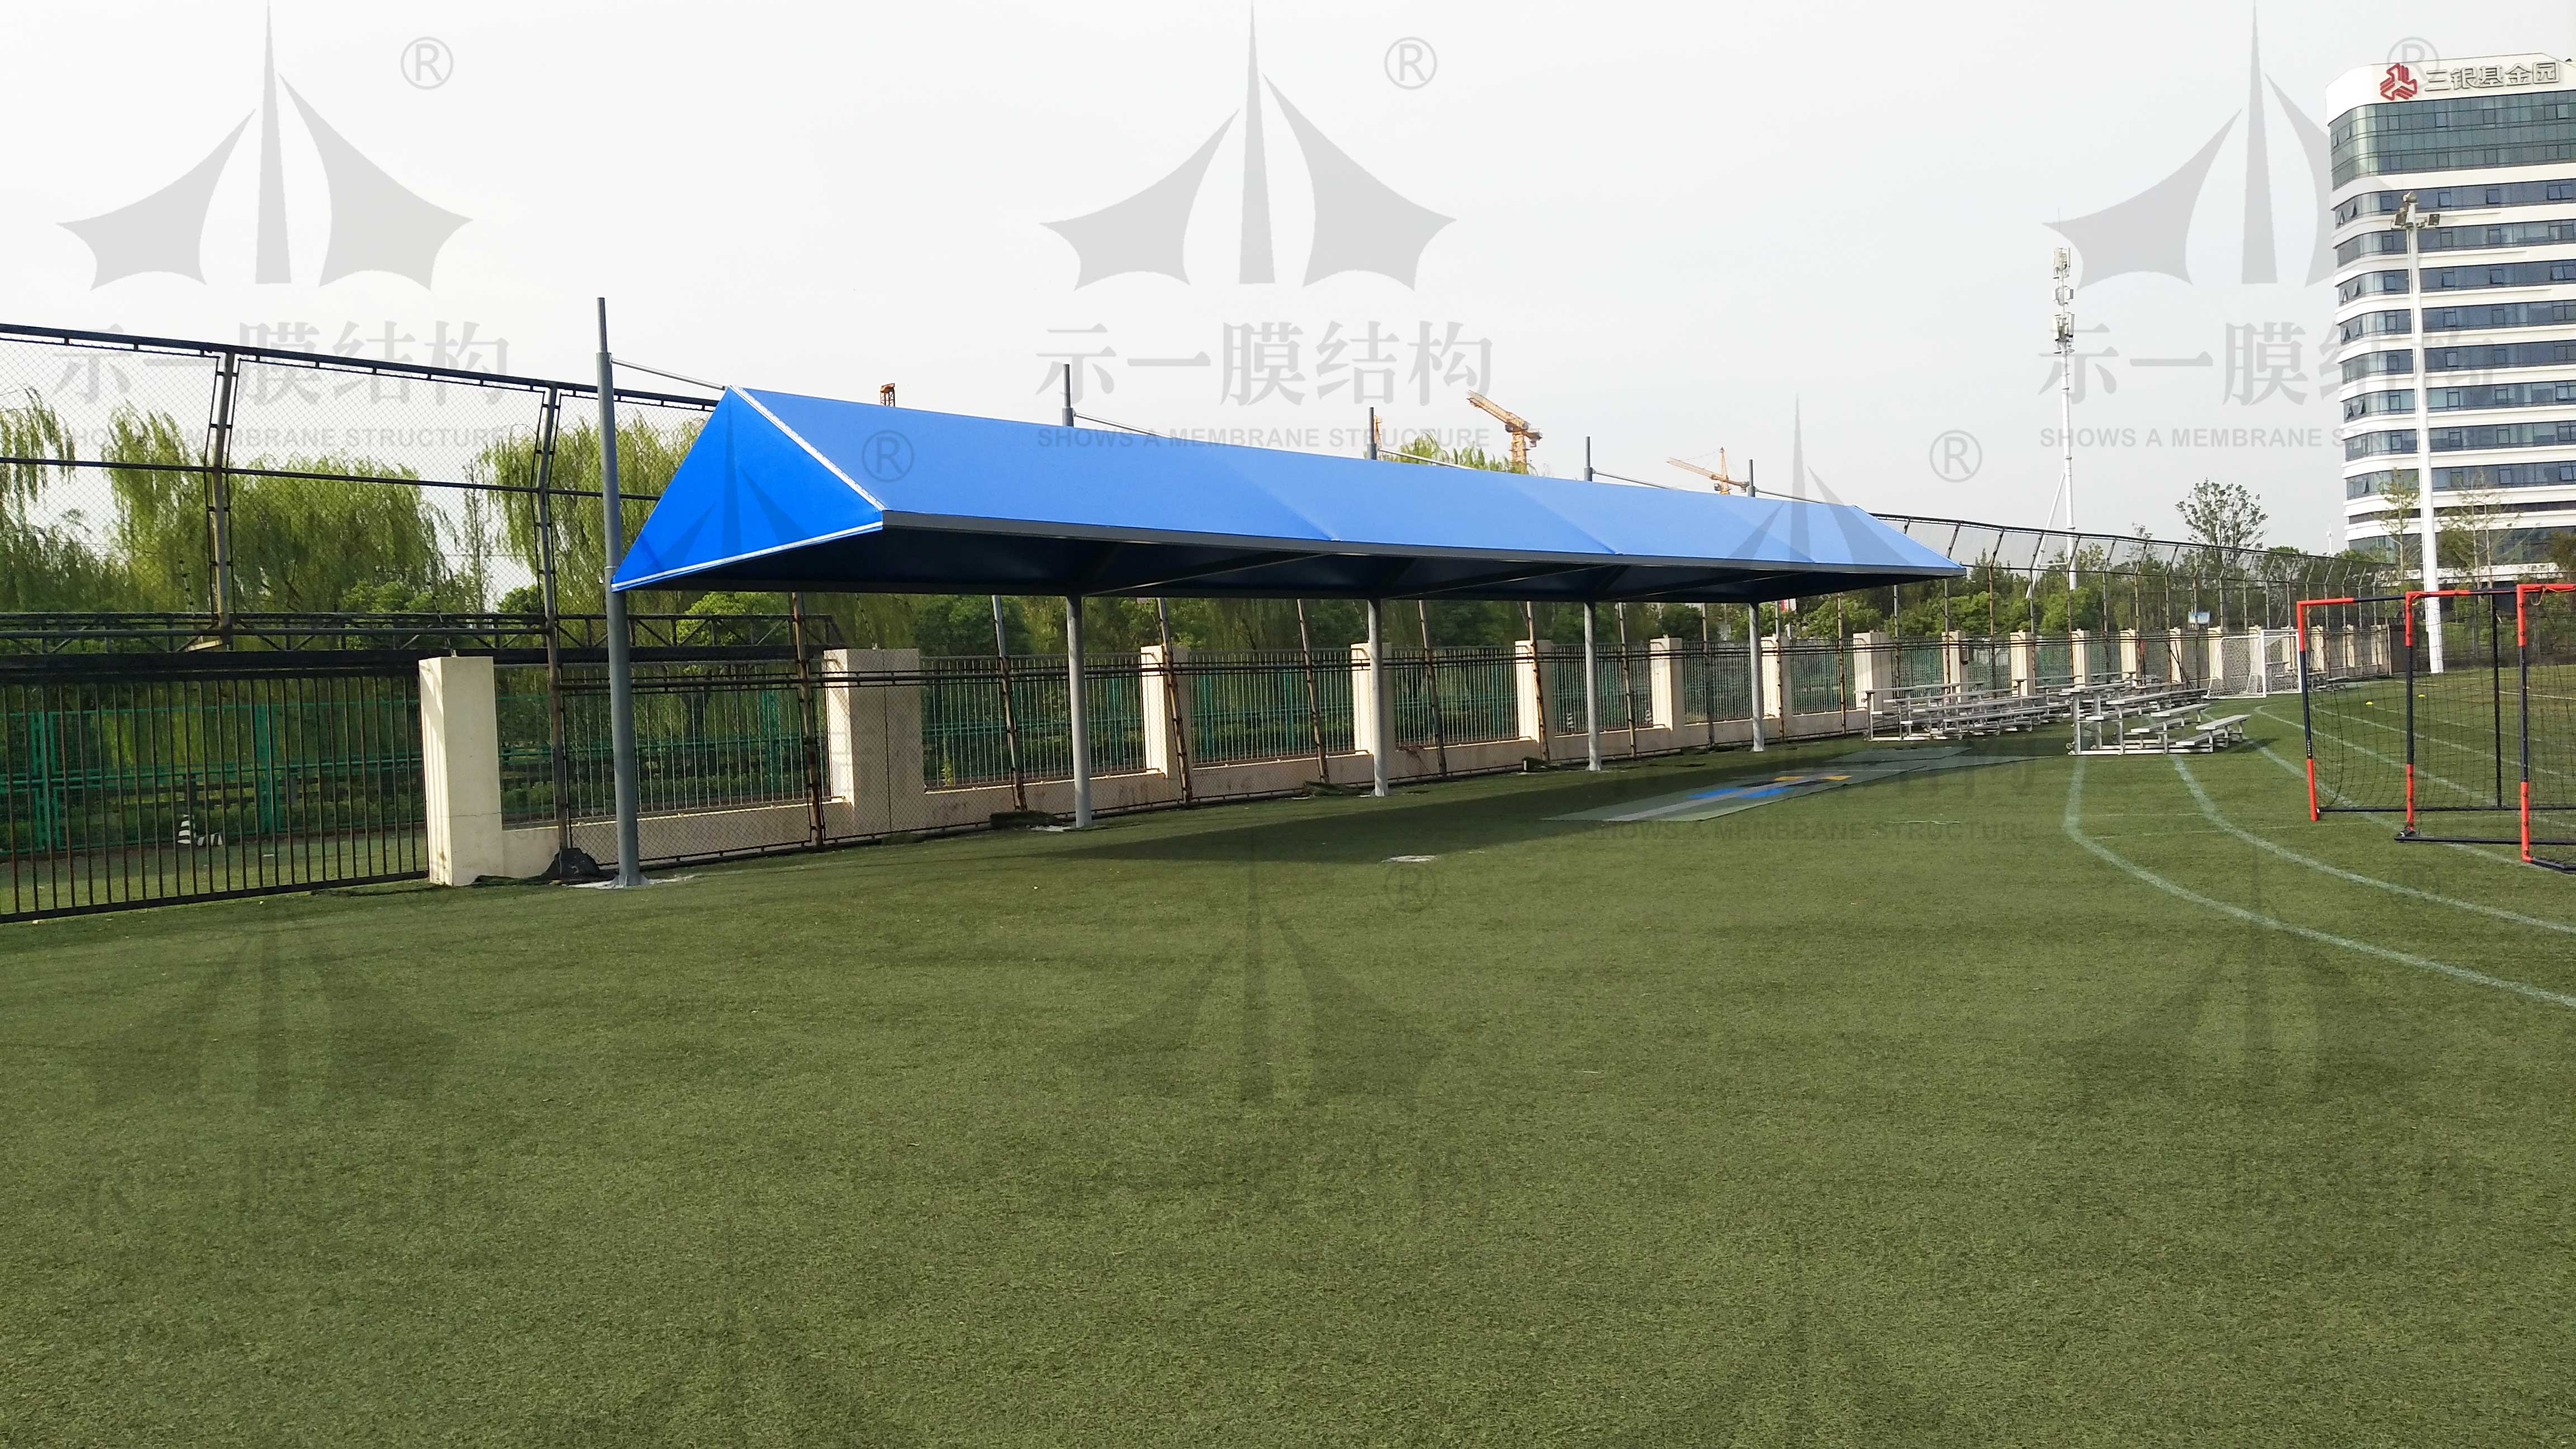 Field visit to the membrane structure awning in the British School in Shanghai